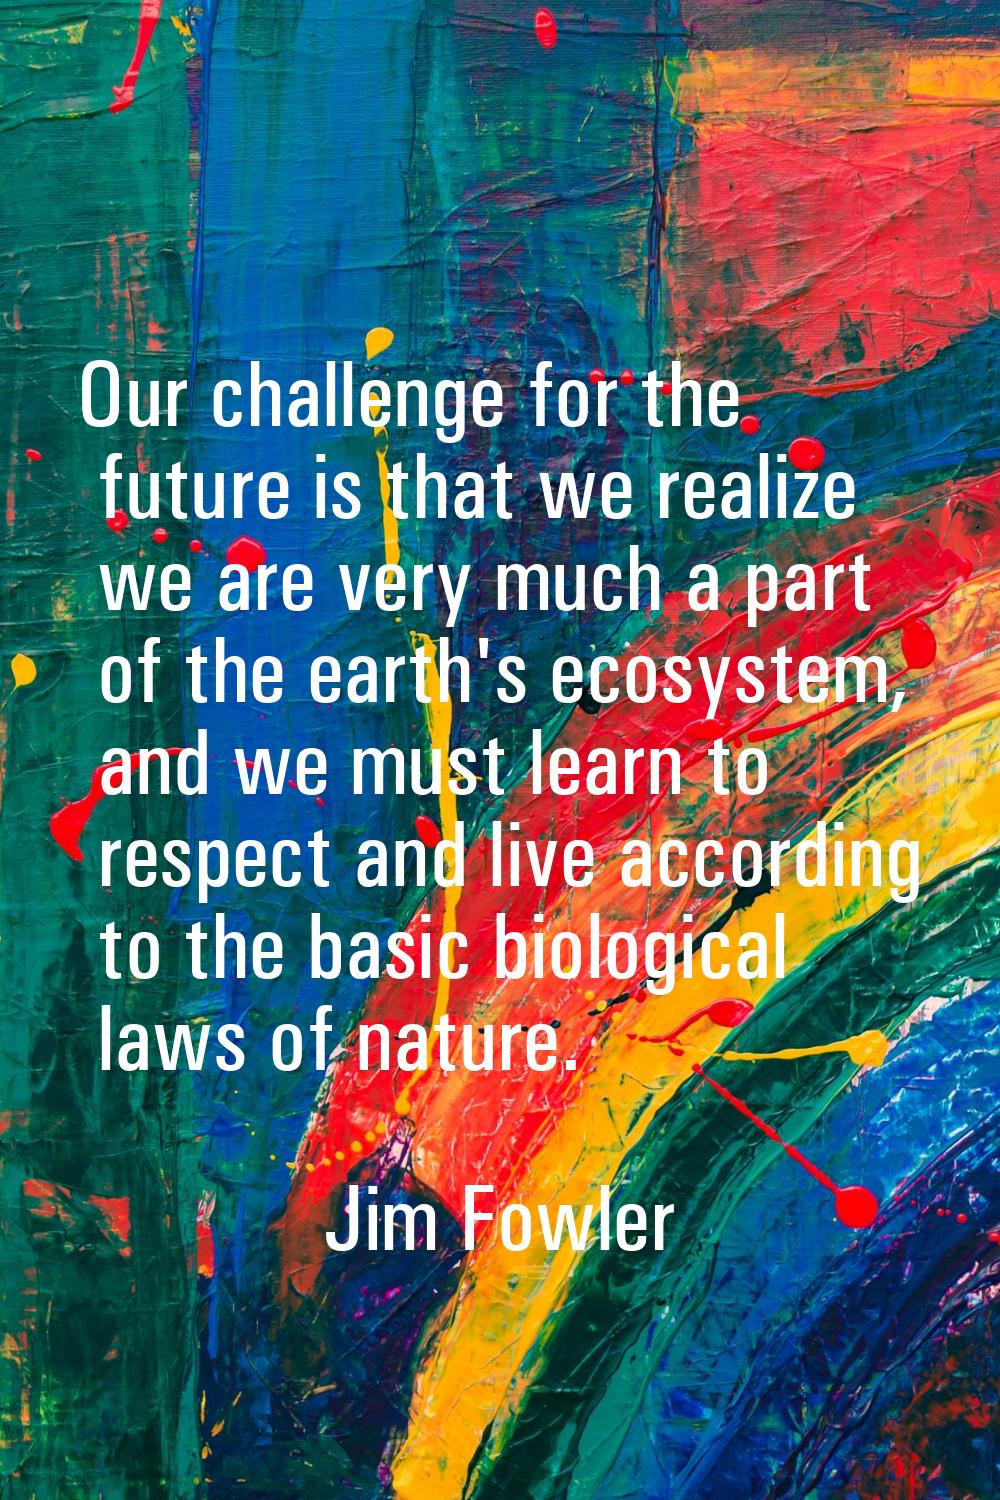 Our challenge for the future is that we realize we are very much a part of the earth's ecosystem, a